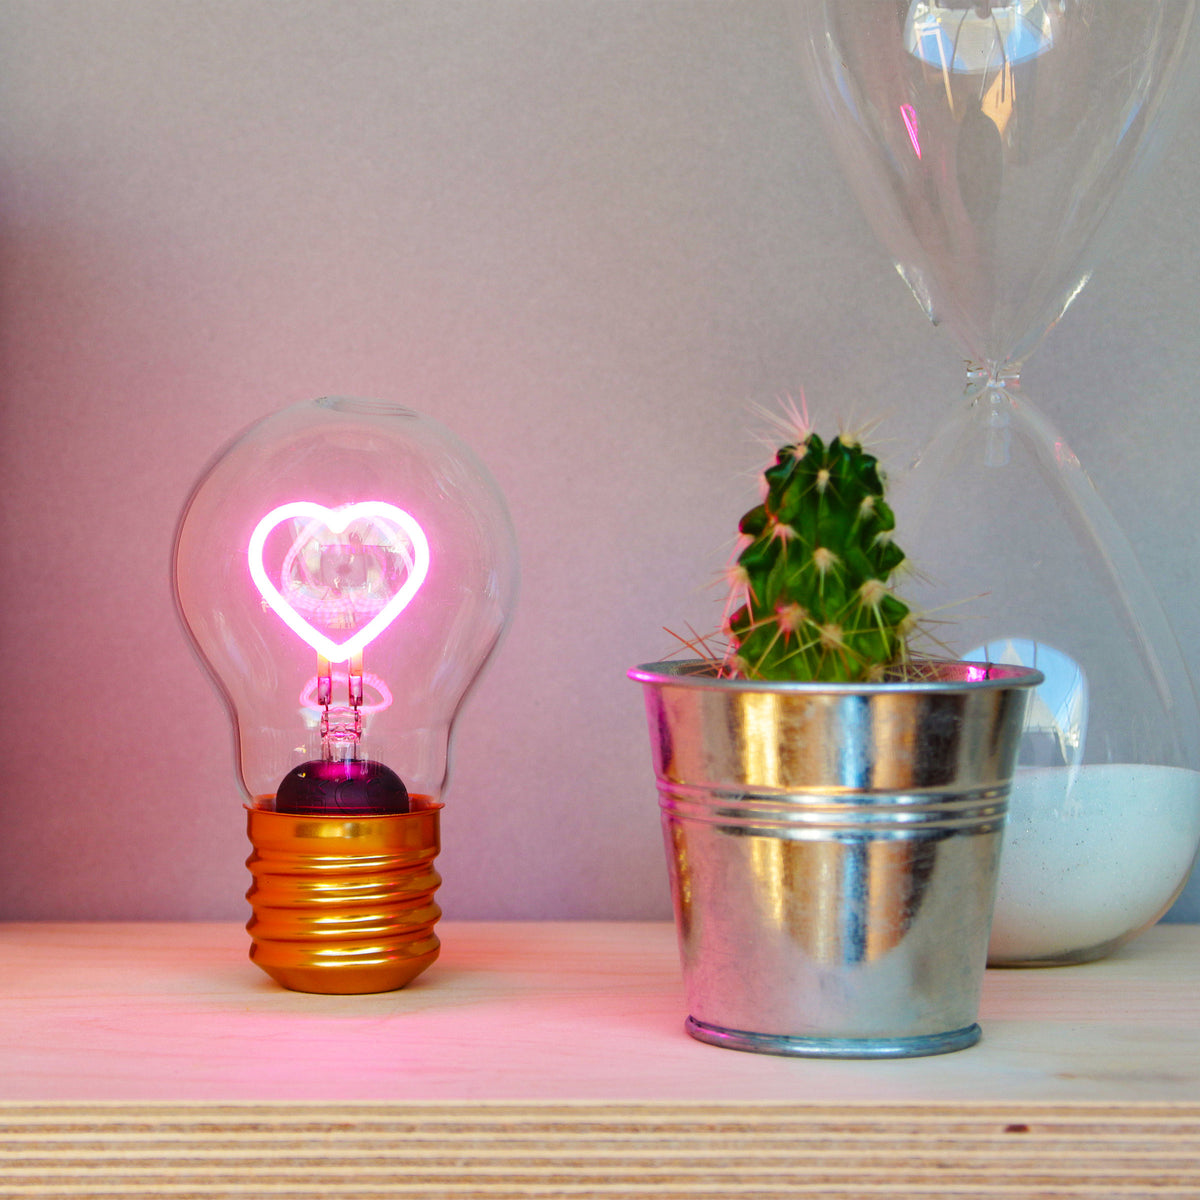 Lightbulb with heart-shaped LED filament, on shelf with cactus and hourglass.